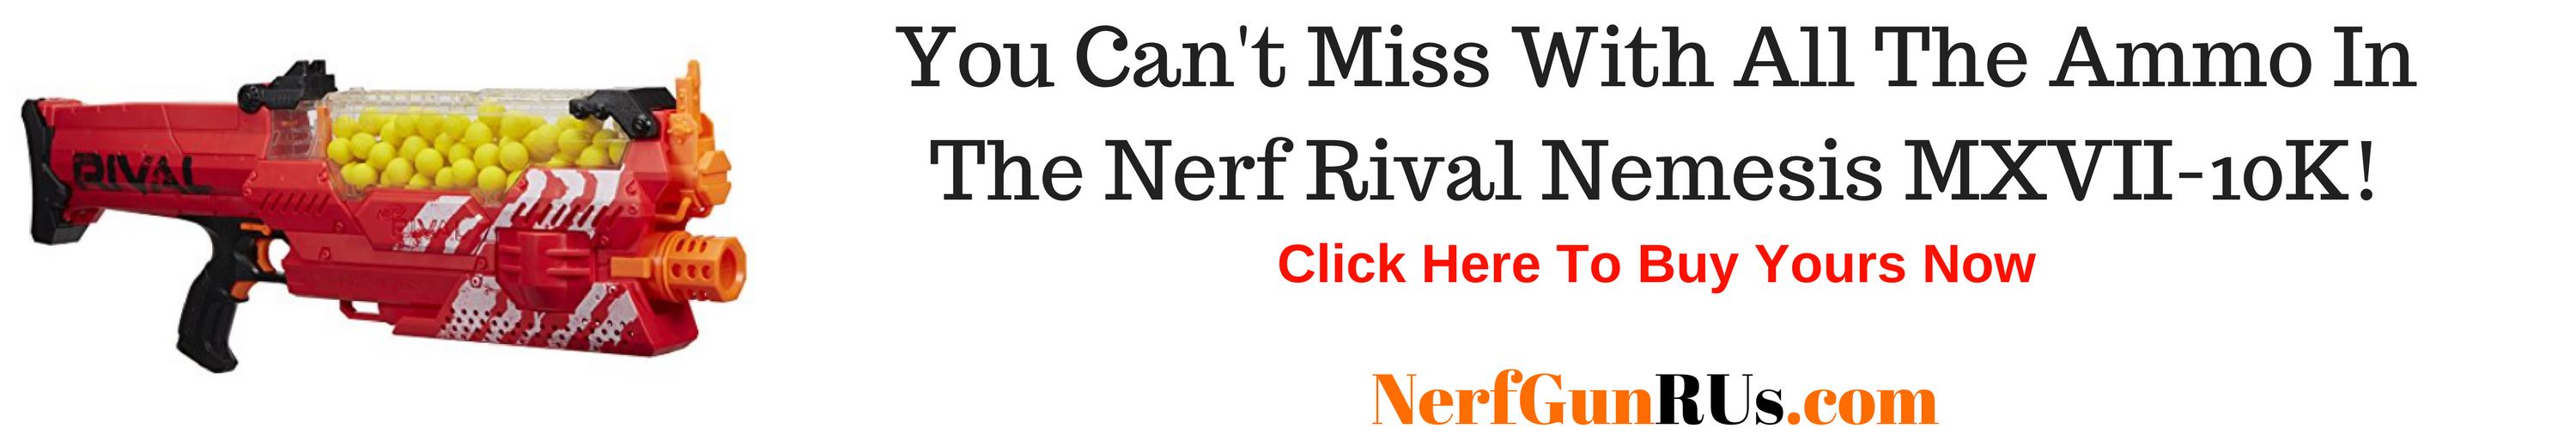 Are You Ready For All The Ammo In the Nerf Rival Nemesis MXVII-10K | NerfGunRUs.com